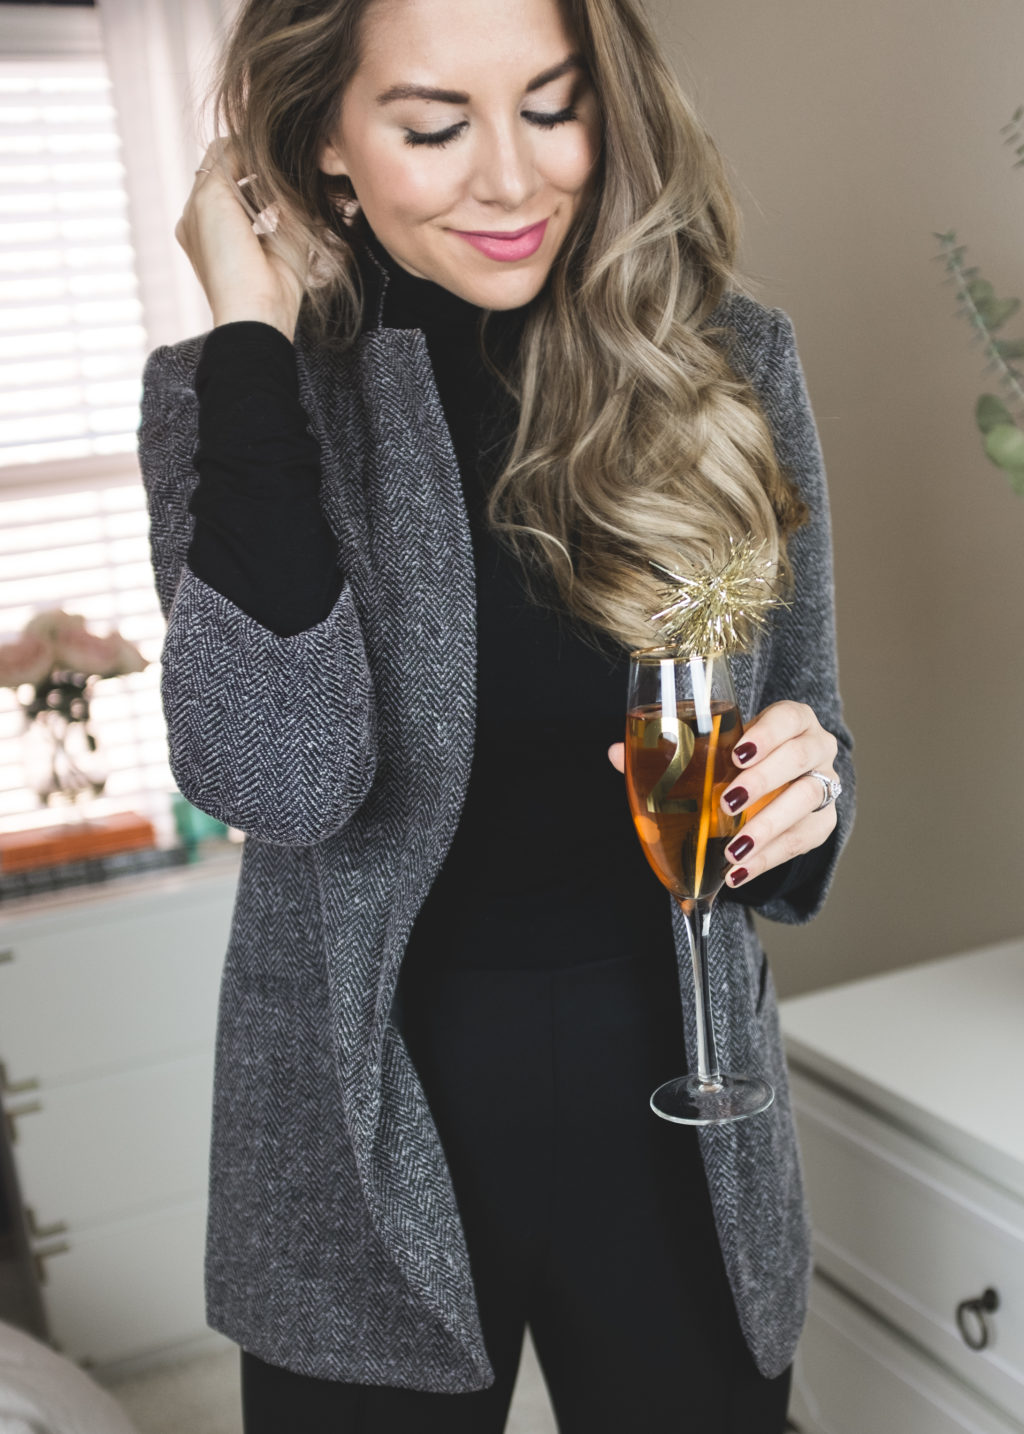 dress up a blazer for a holiday party